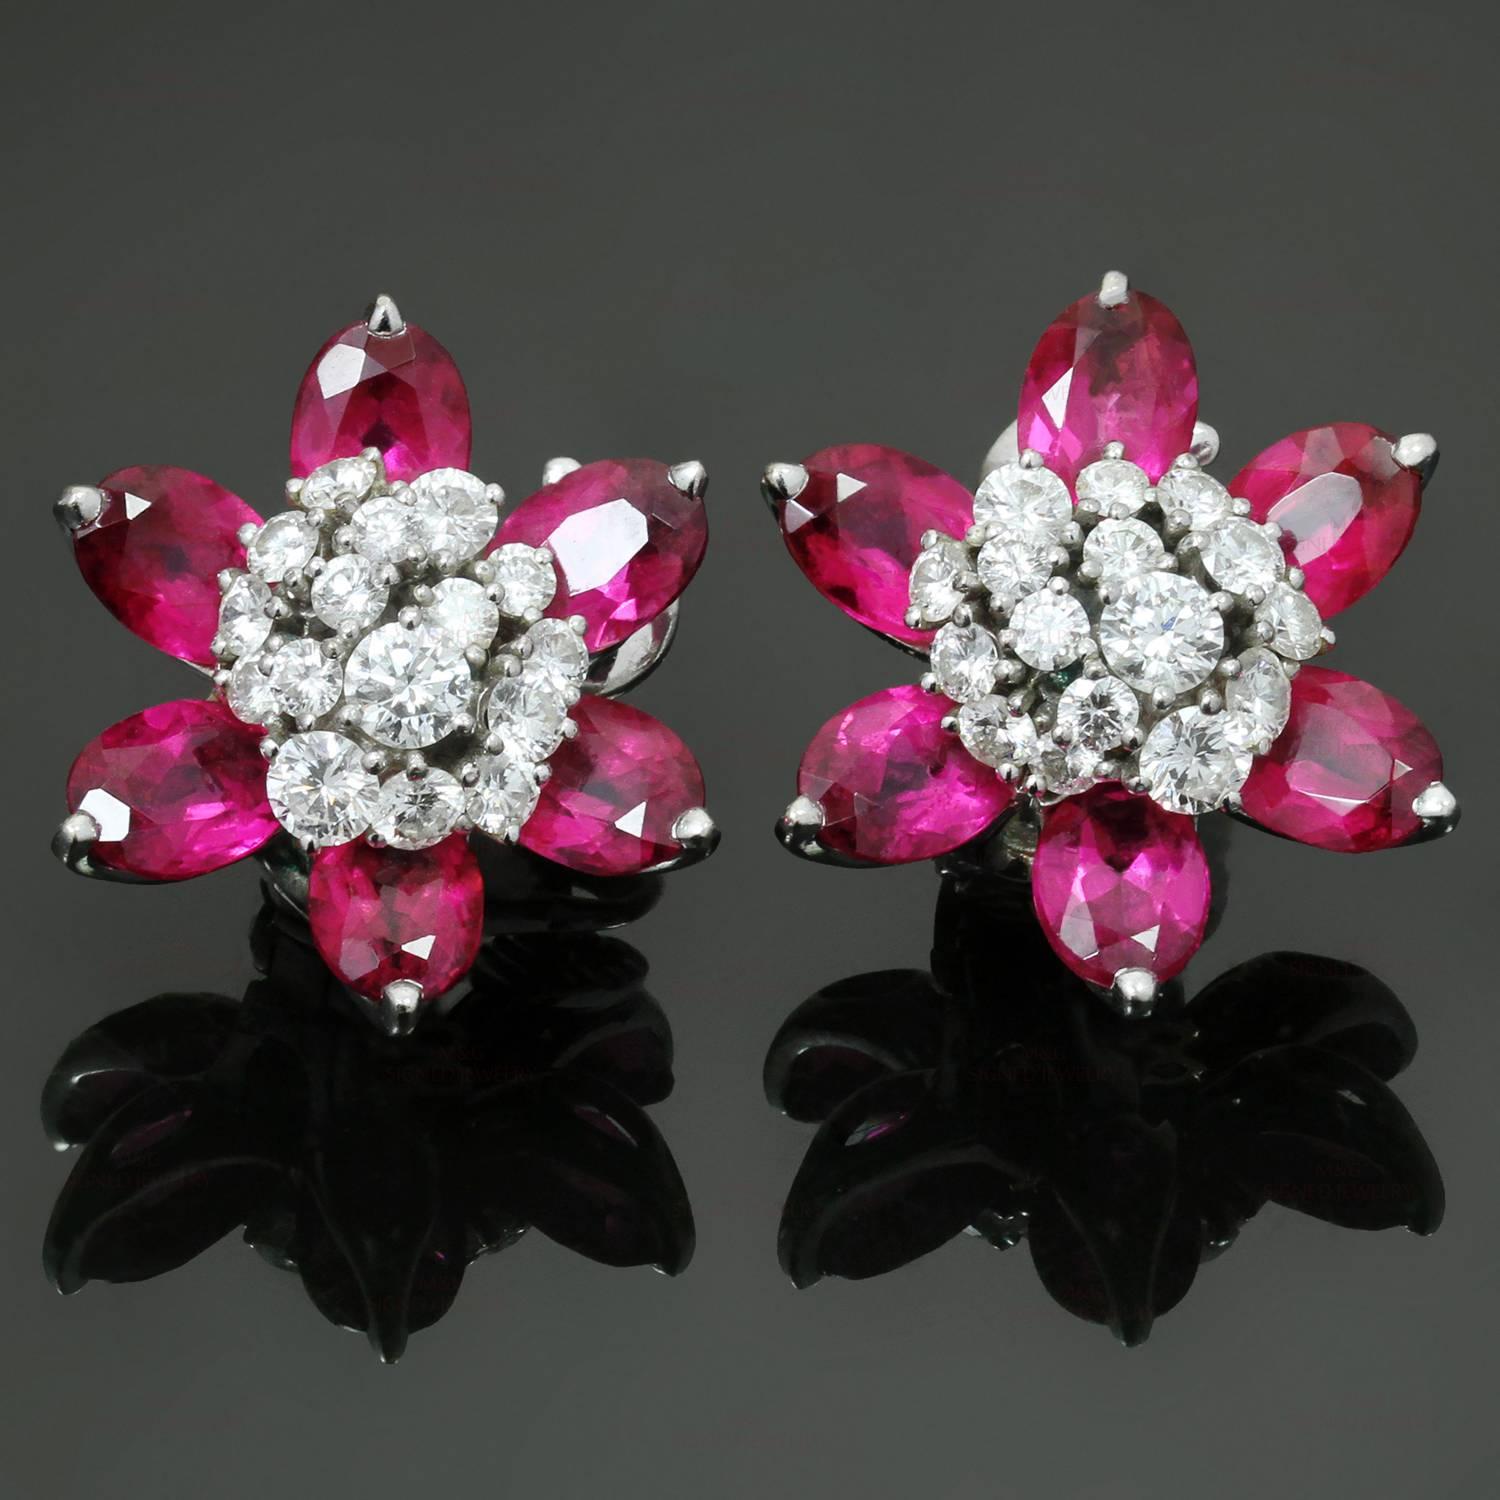 These gorgeous Van Cleef & Arpels flower-shaped earrings from the vibrant Hawaii collection are crafted in 18k white gold and set with faceted rubellites and brilliant-cut round diamonds of an estimated 1.40 carats. Made in France circa 1990s.